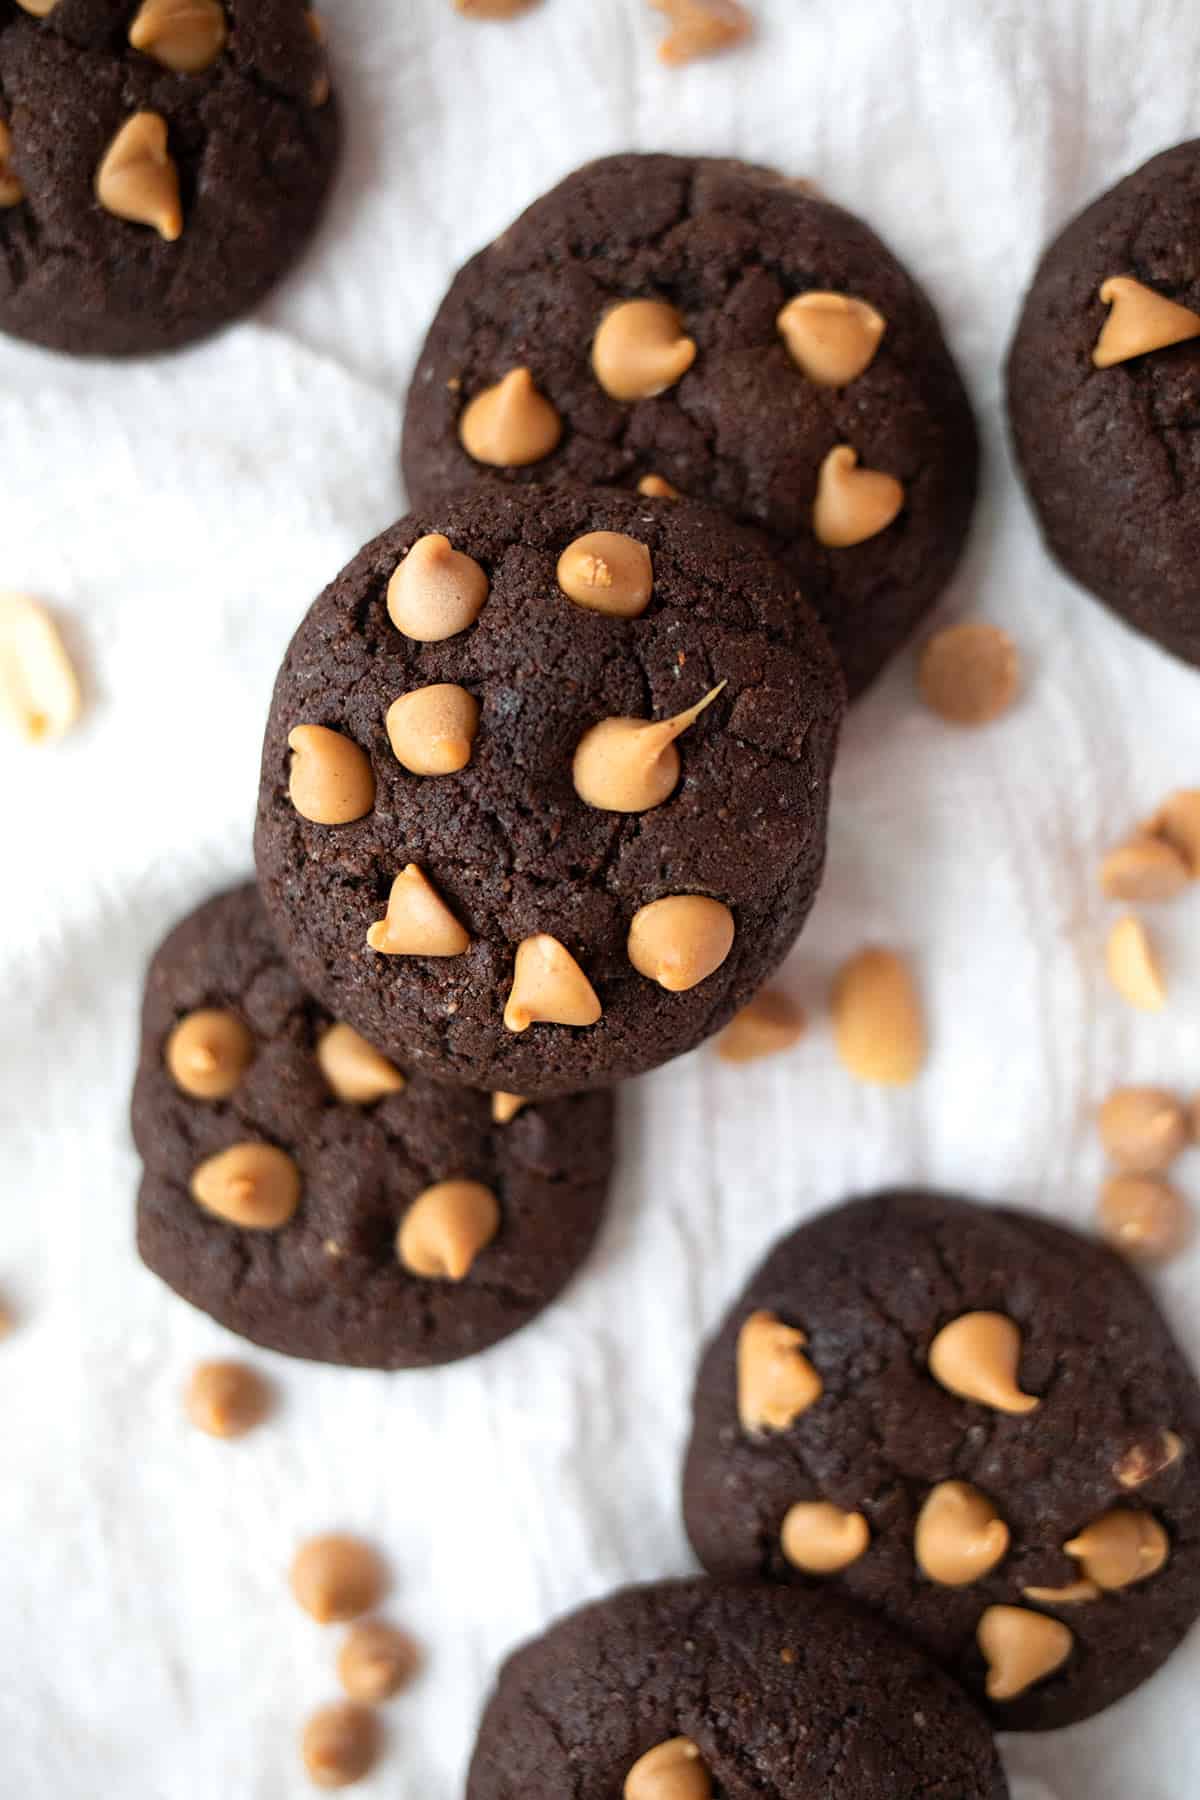 Top down image of Keto Chocolate Peanut Butter Cookies.